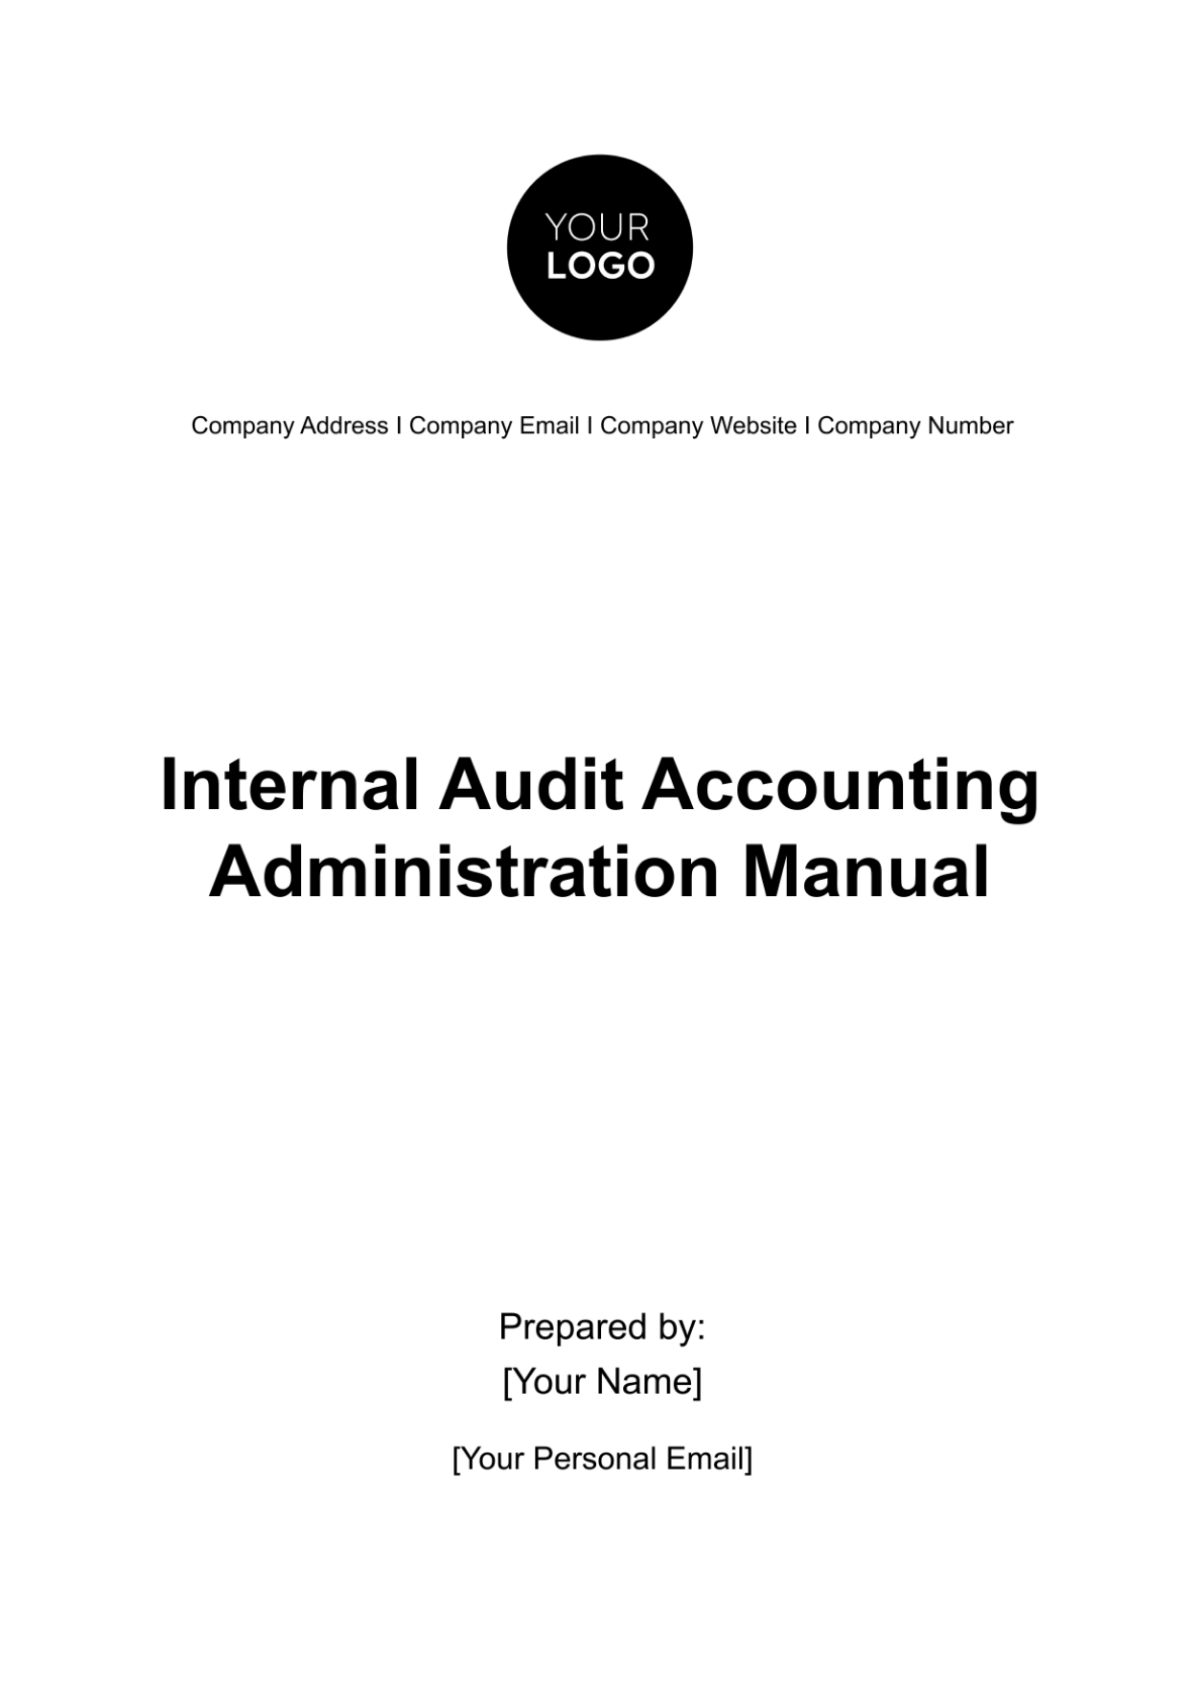 Internal Audit Accounting Administration Manual Template